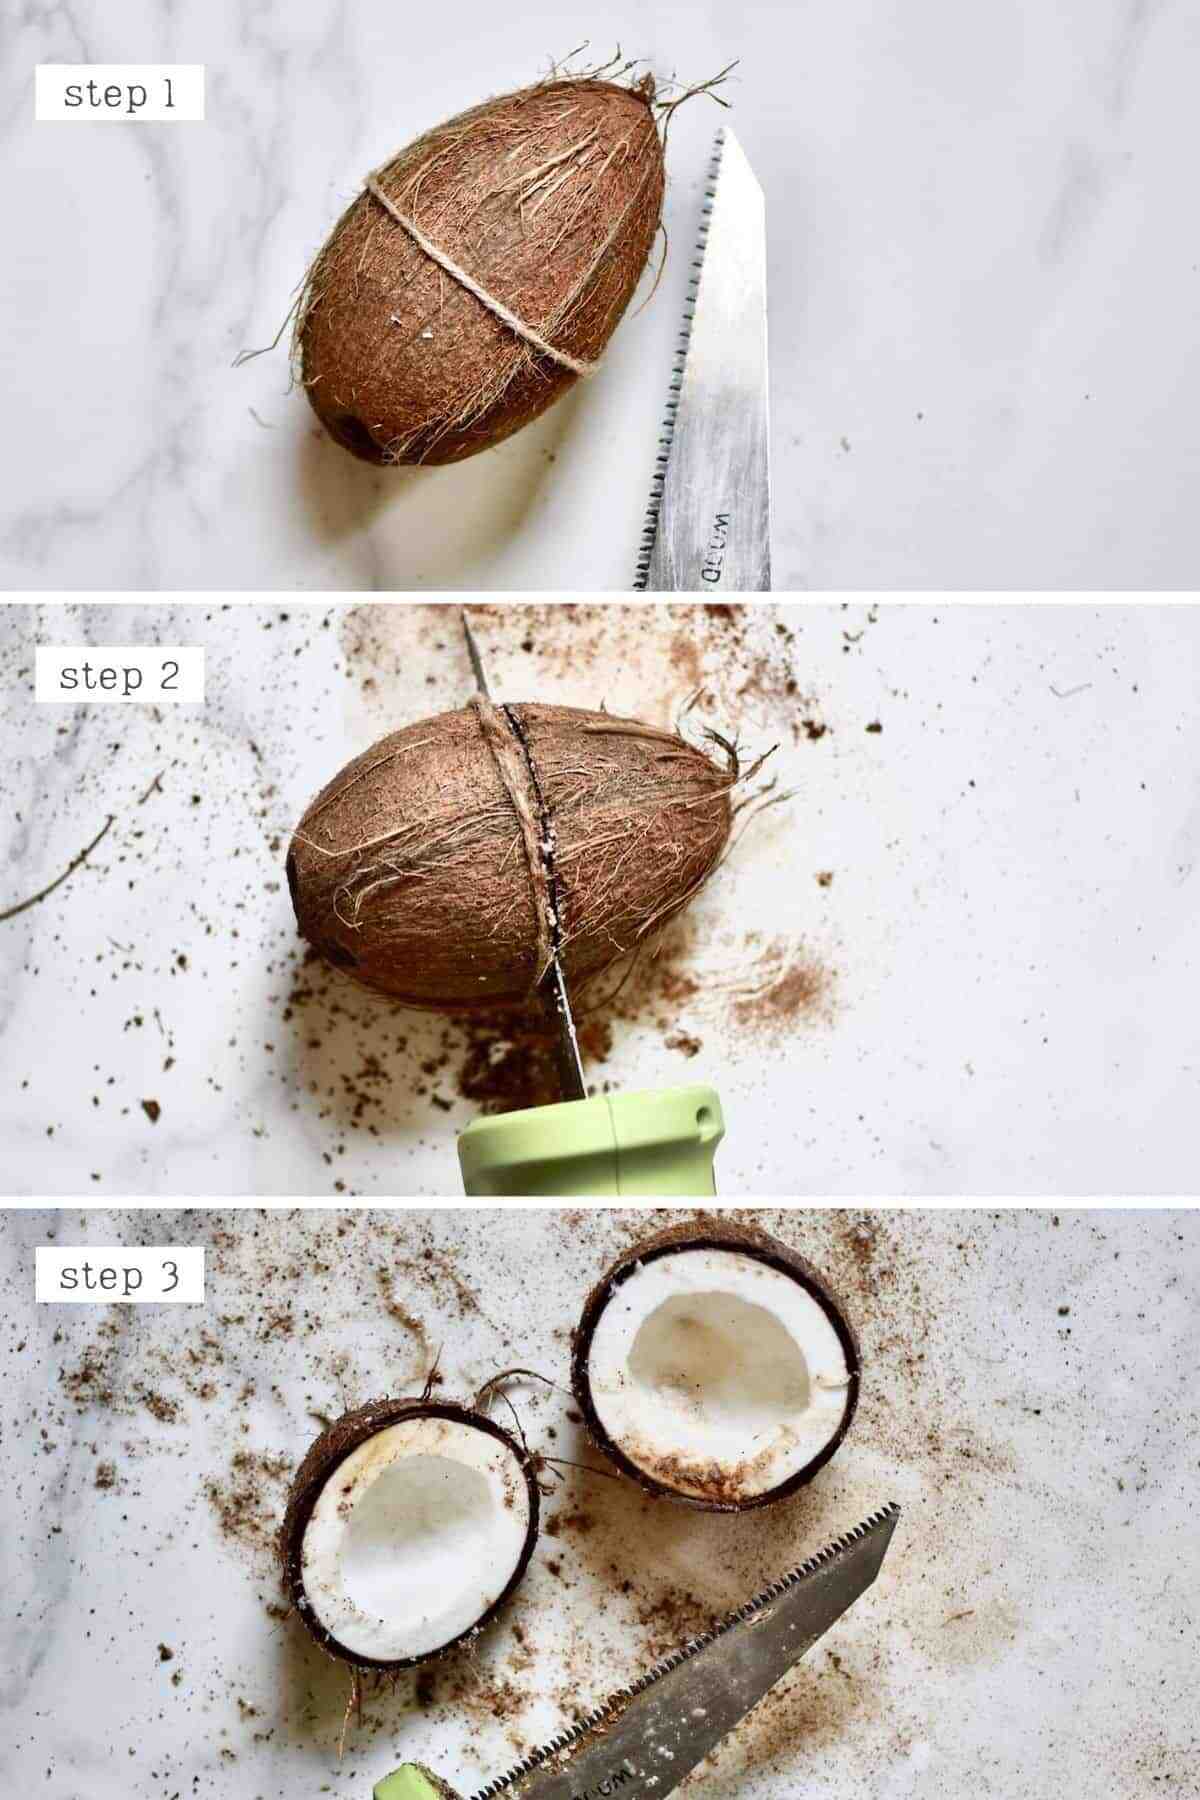 How do you open a coconut without a saw?